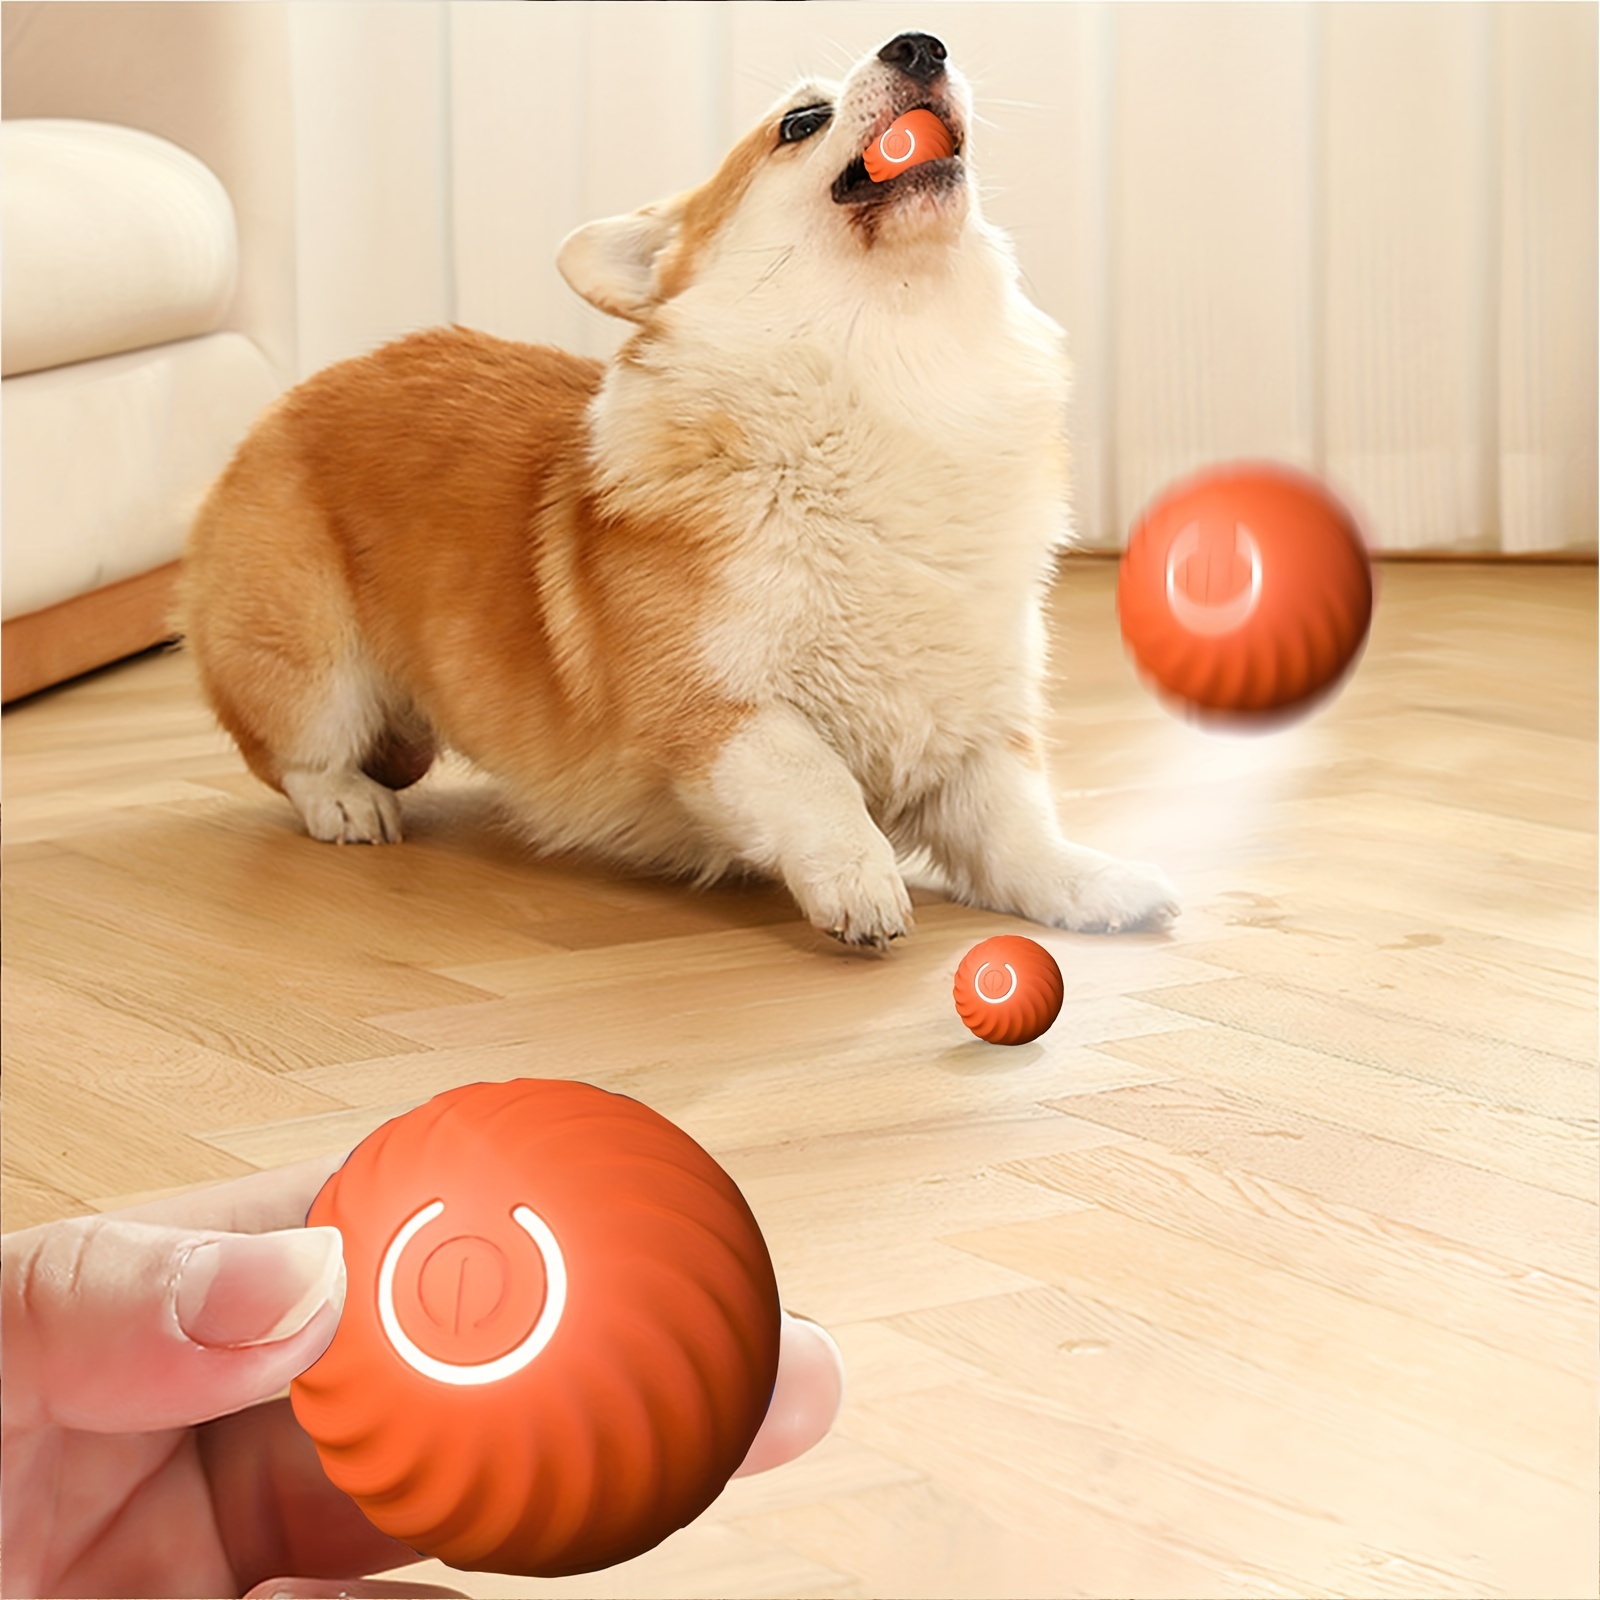 Pawise Treat Launcher Interactive Dog Toy